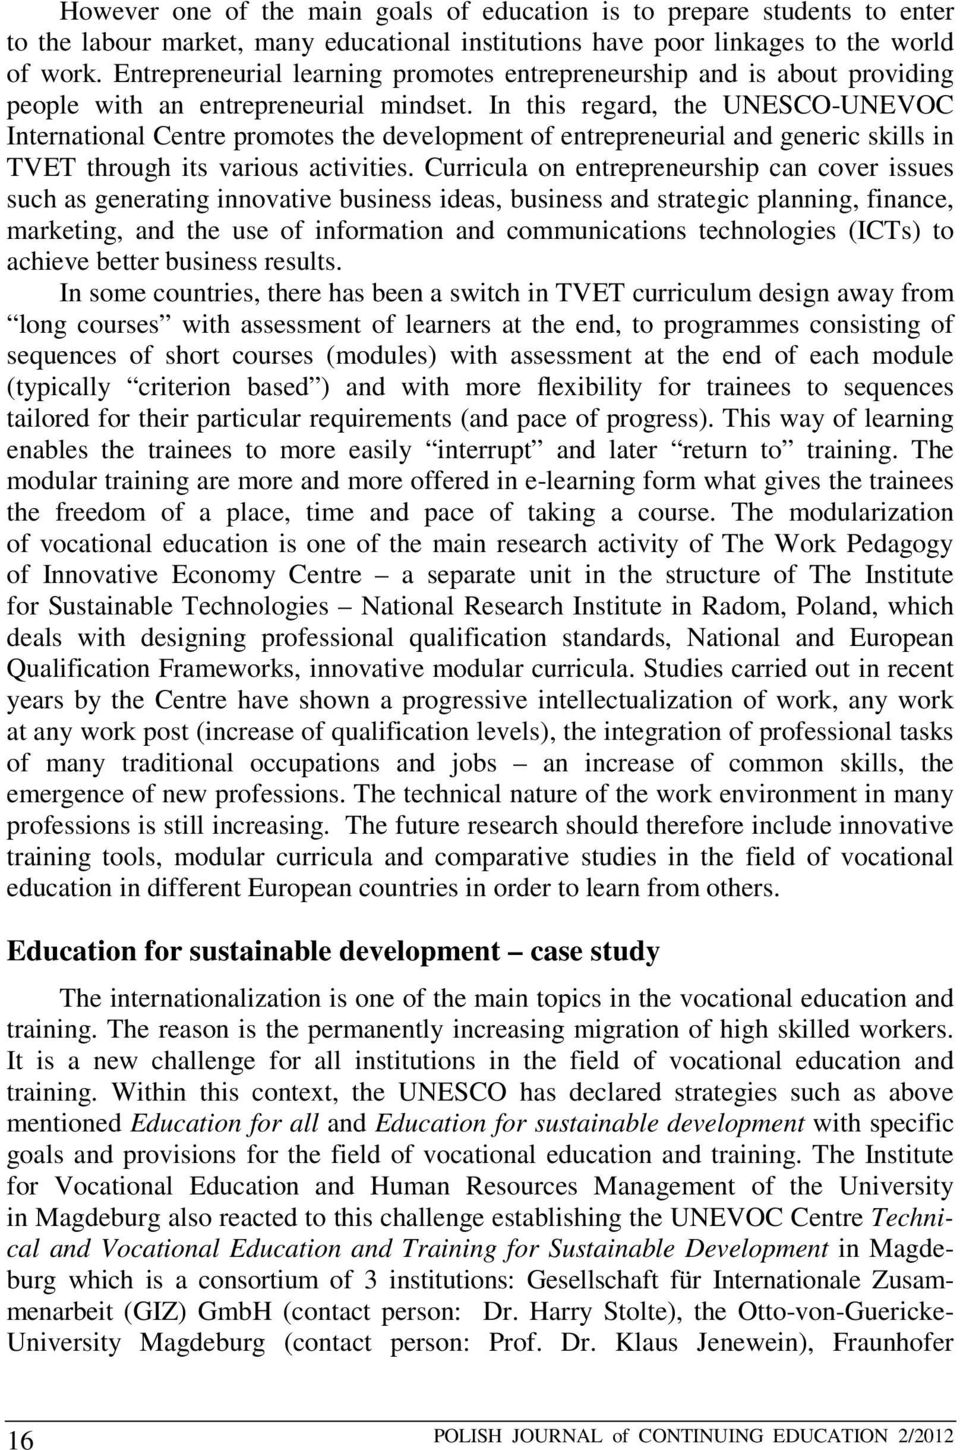 In this regard, the UNESCO-UNEVOC International Centre promotes the development of entrepreneurial and generic skills in TVET through its various activities.